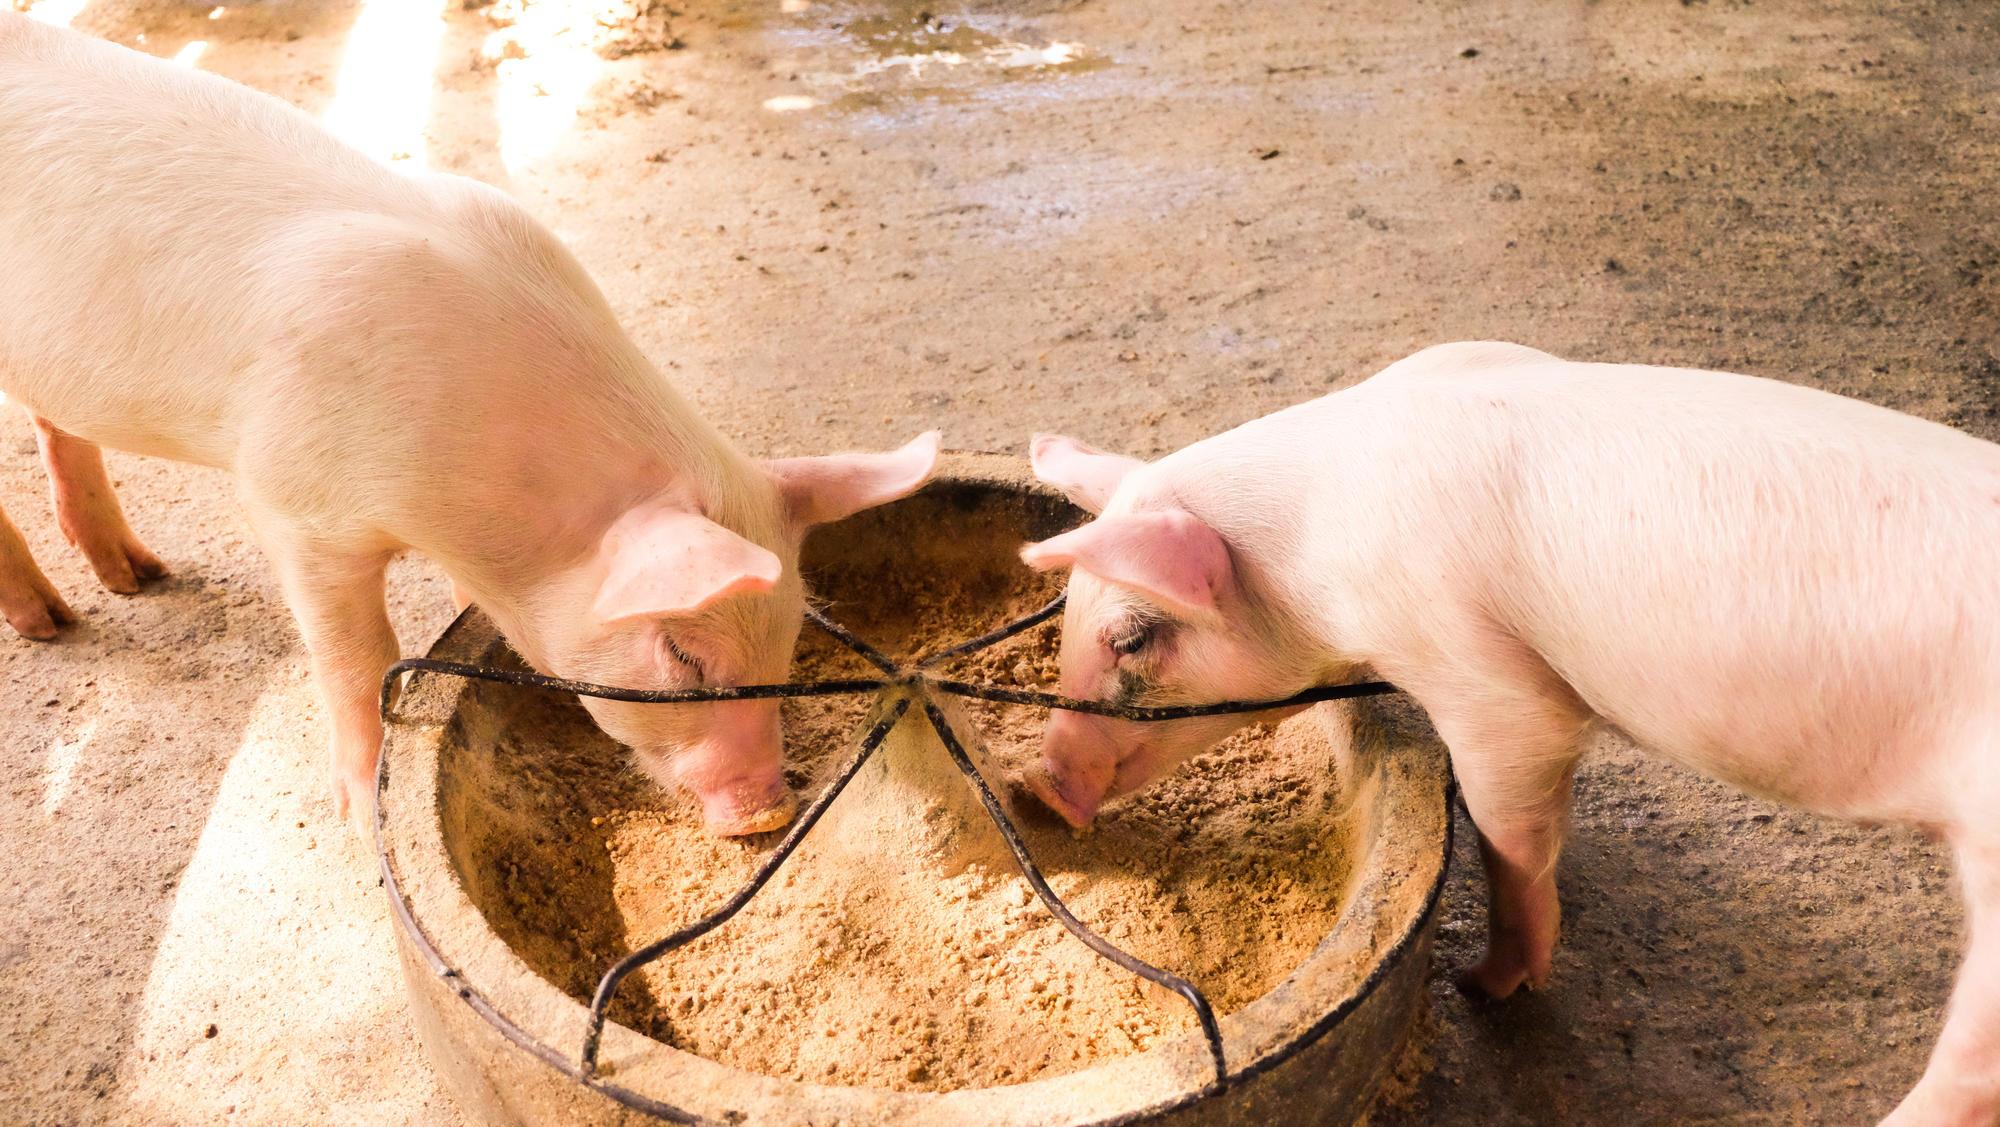 Two pigs eating feed.